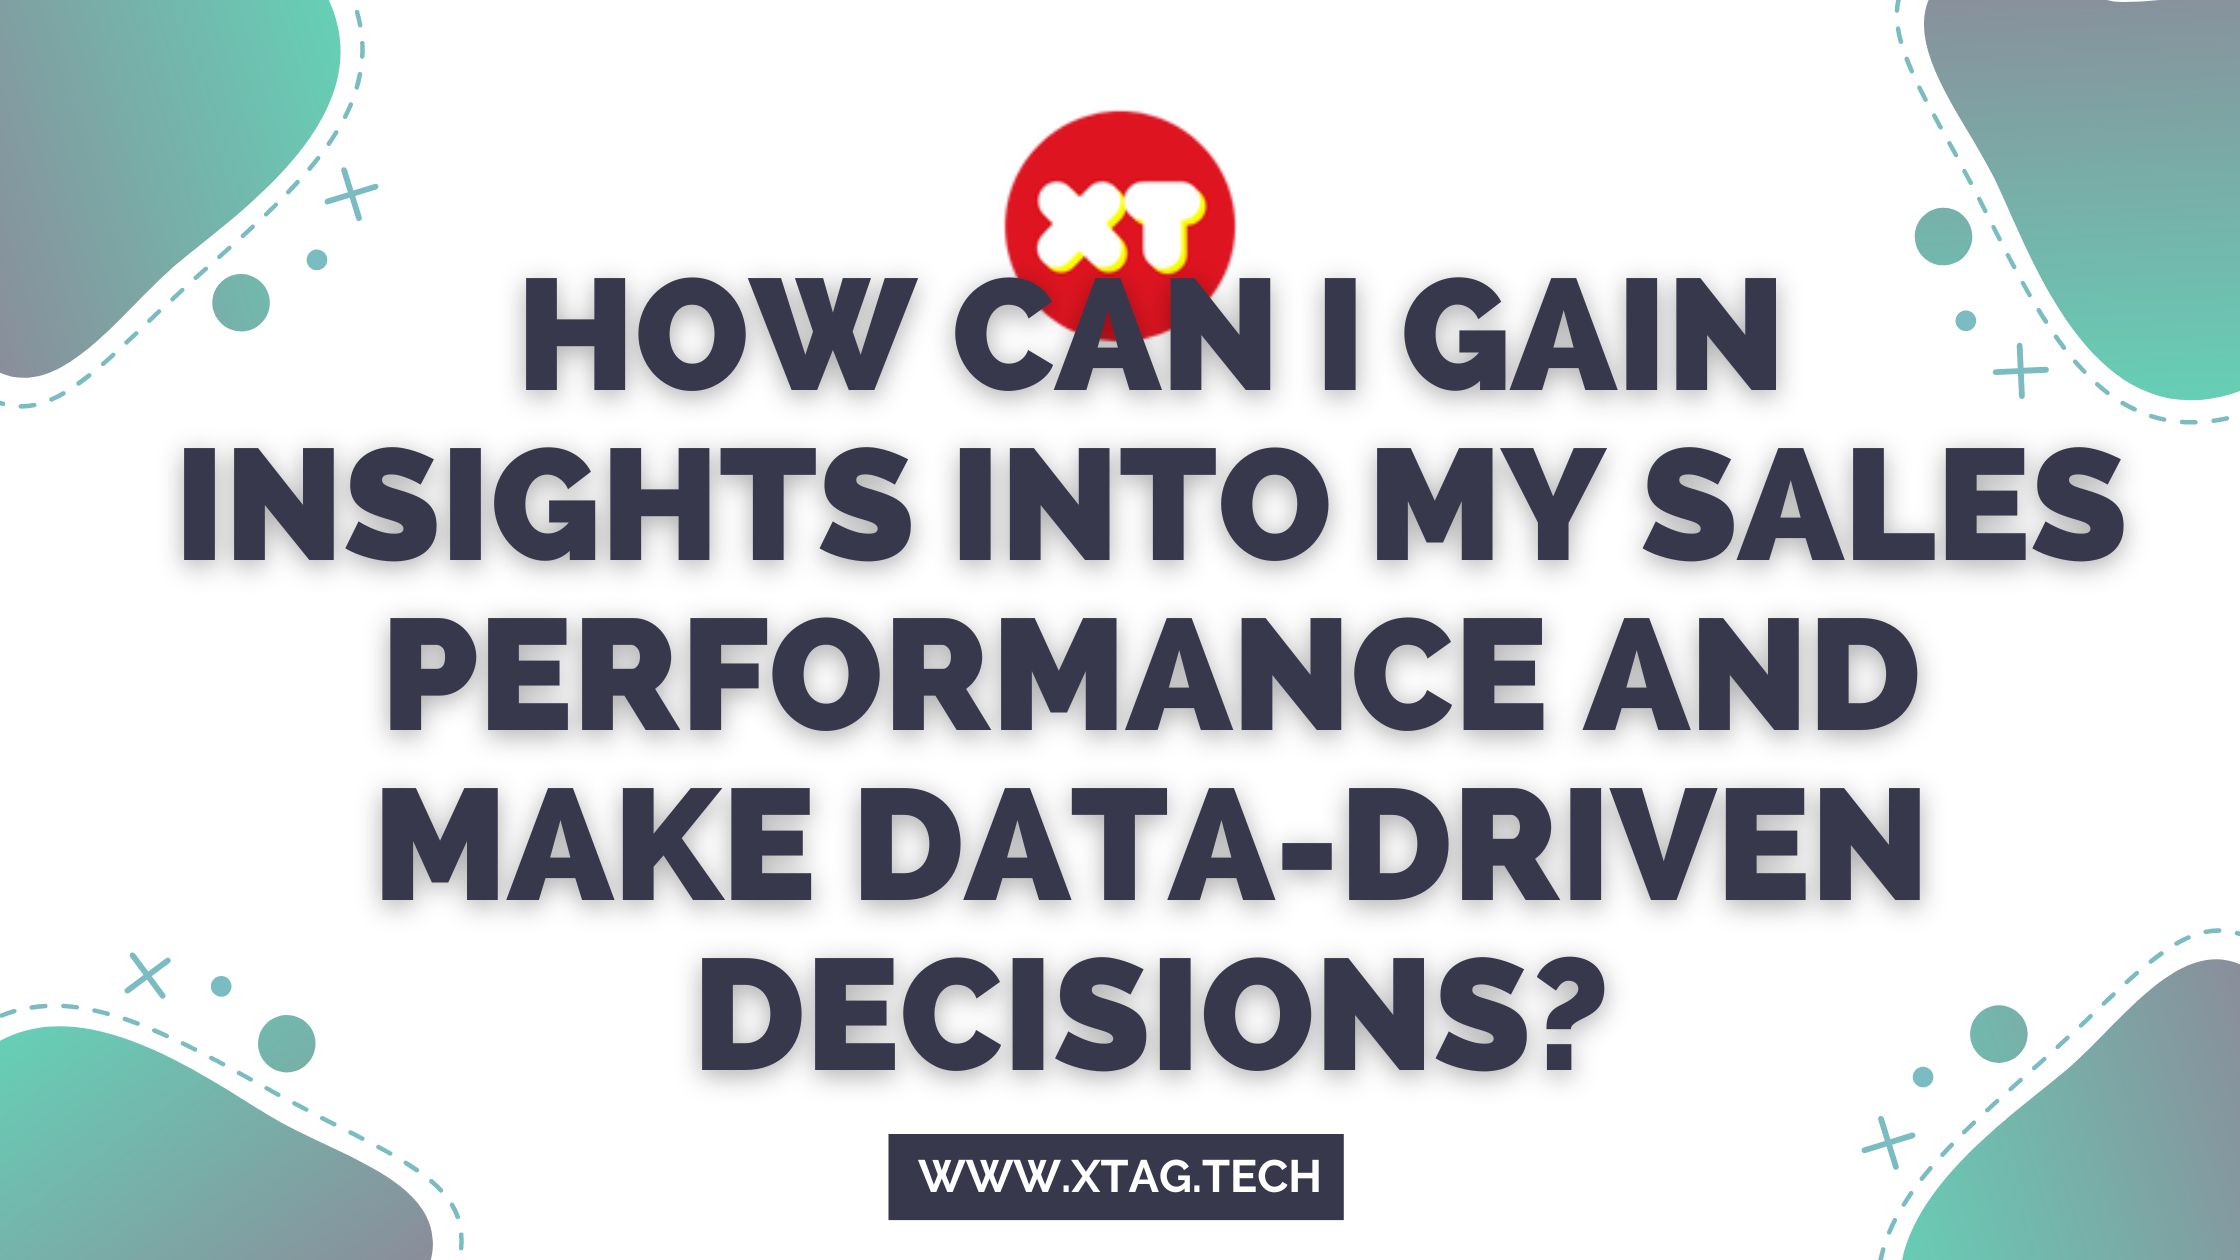 How Can I Gain Insights Into My Sales Performance And Make Data-Driven Decisions?